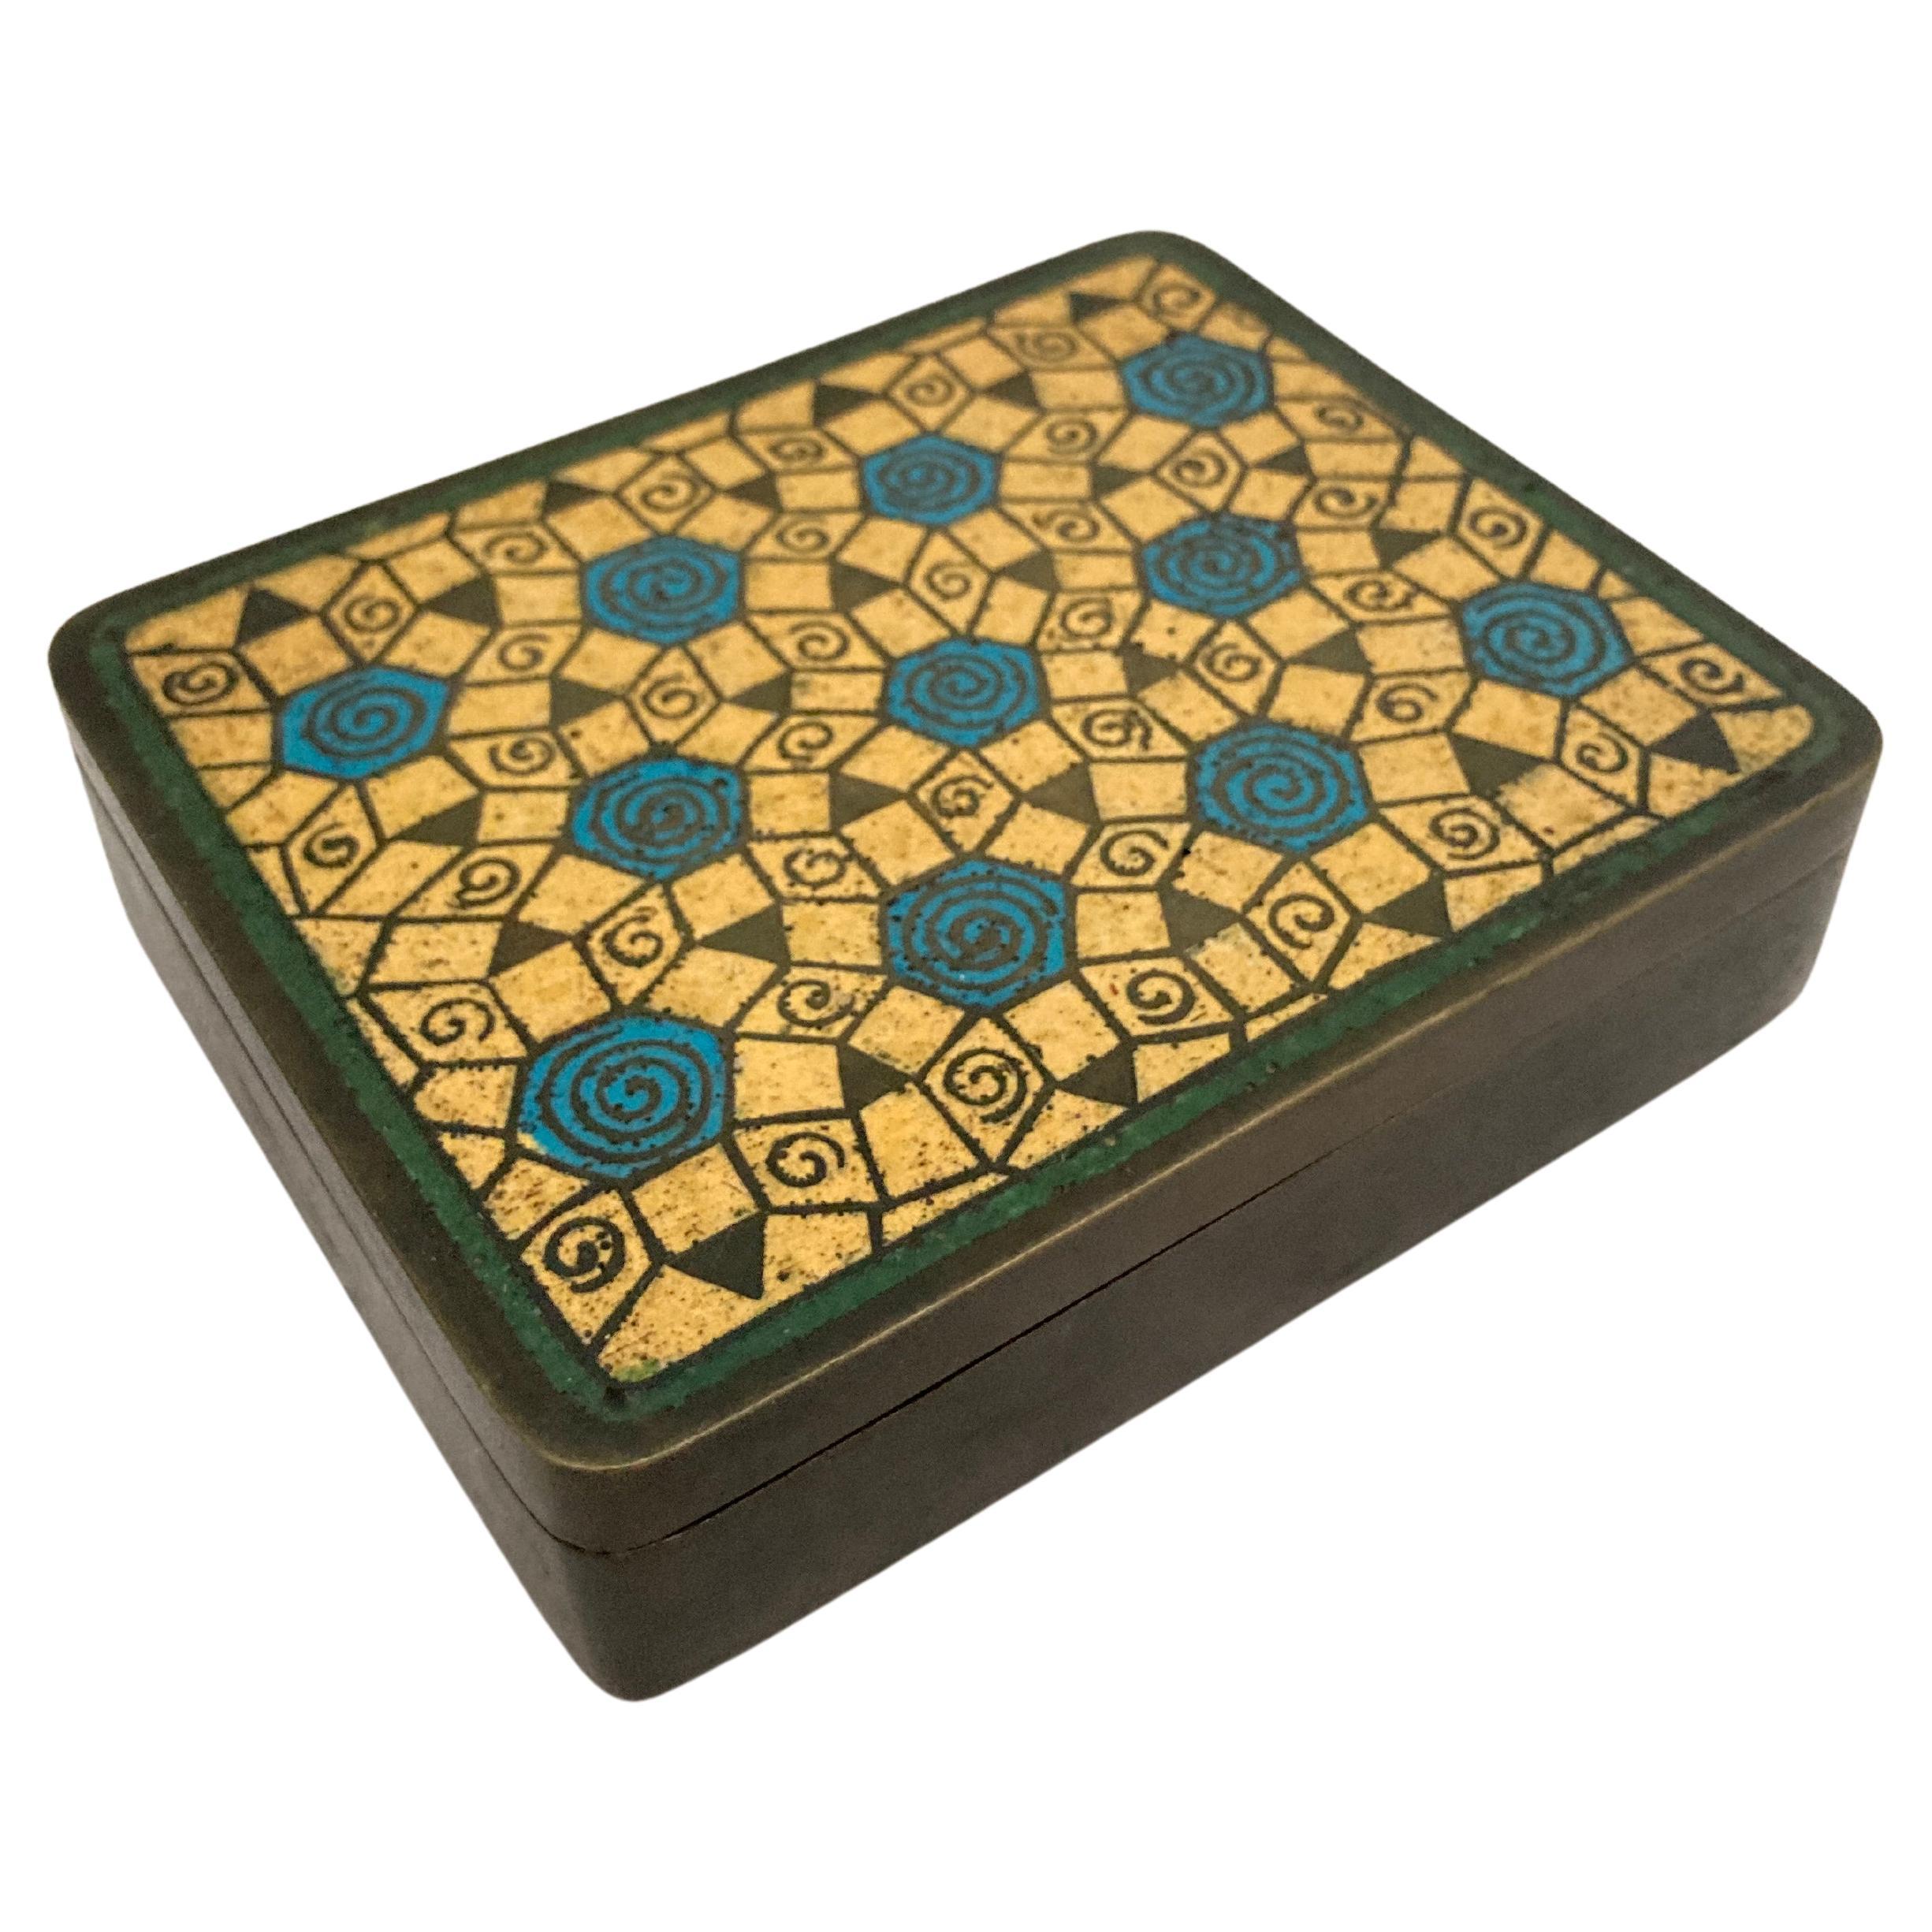 1925 enameled bronze boxe signed by Primavera For Sale